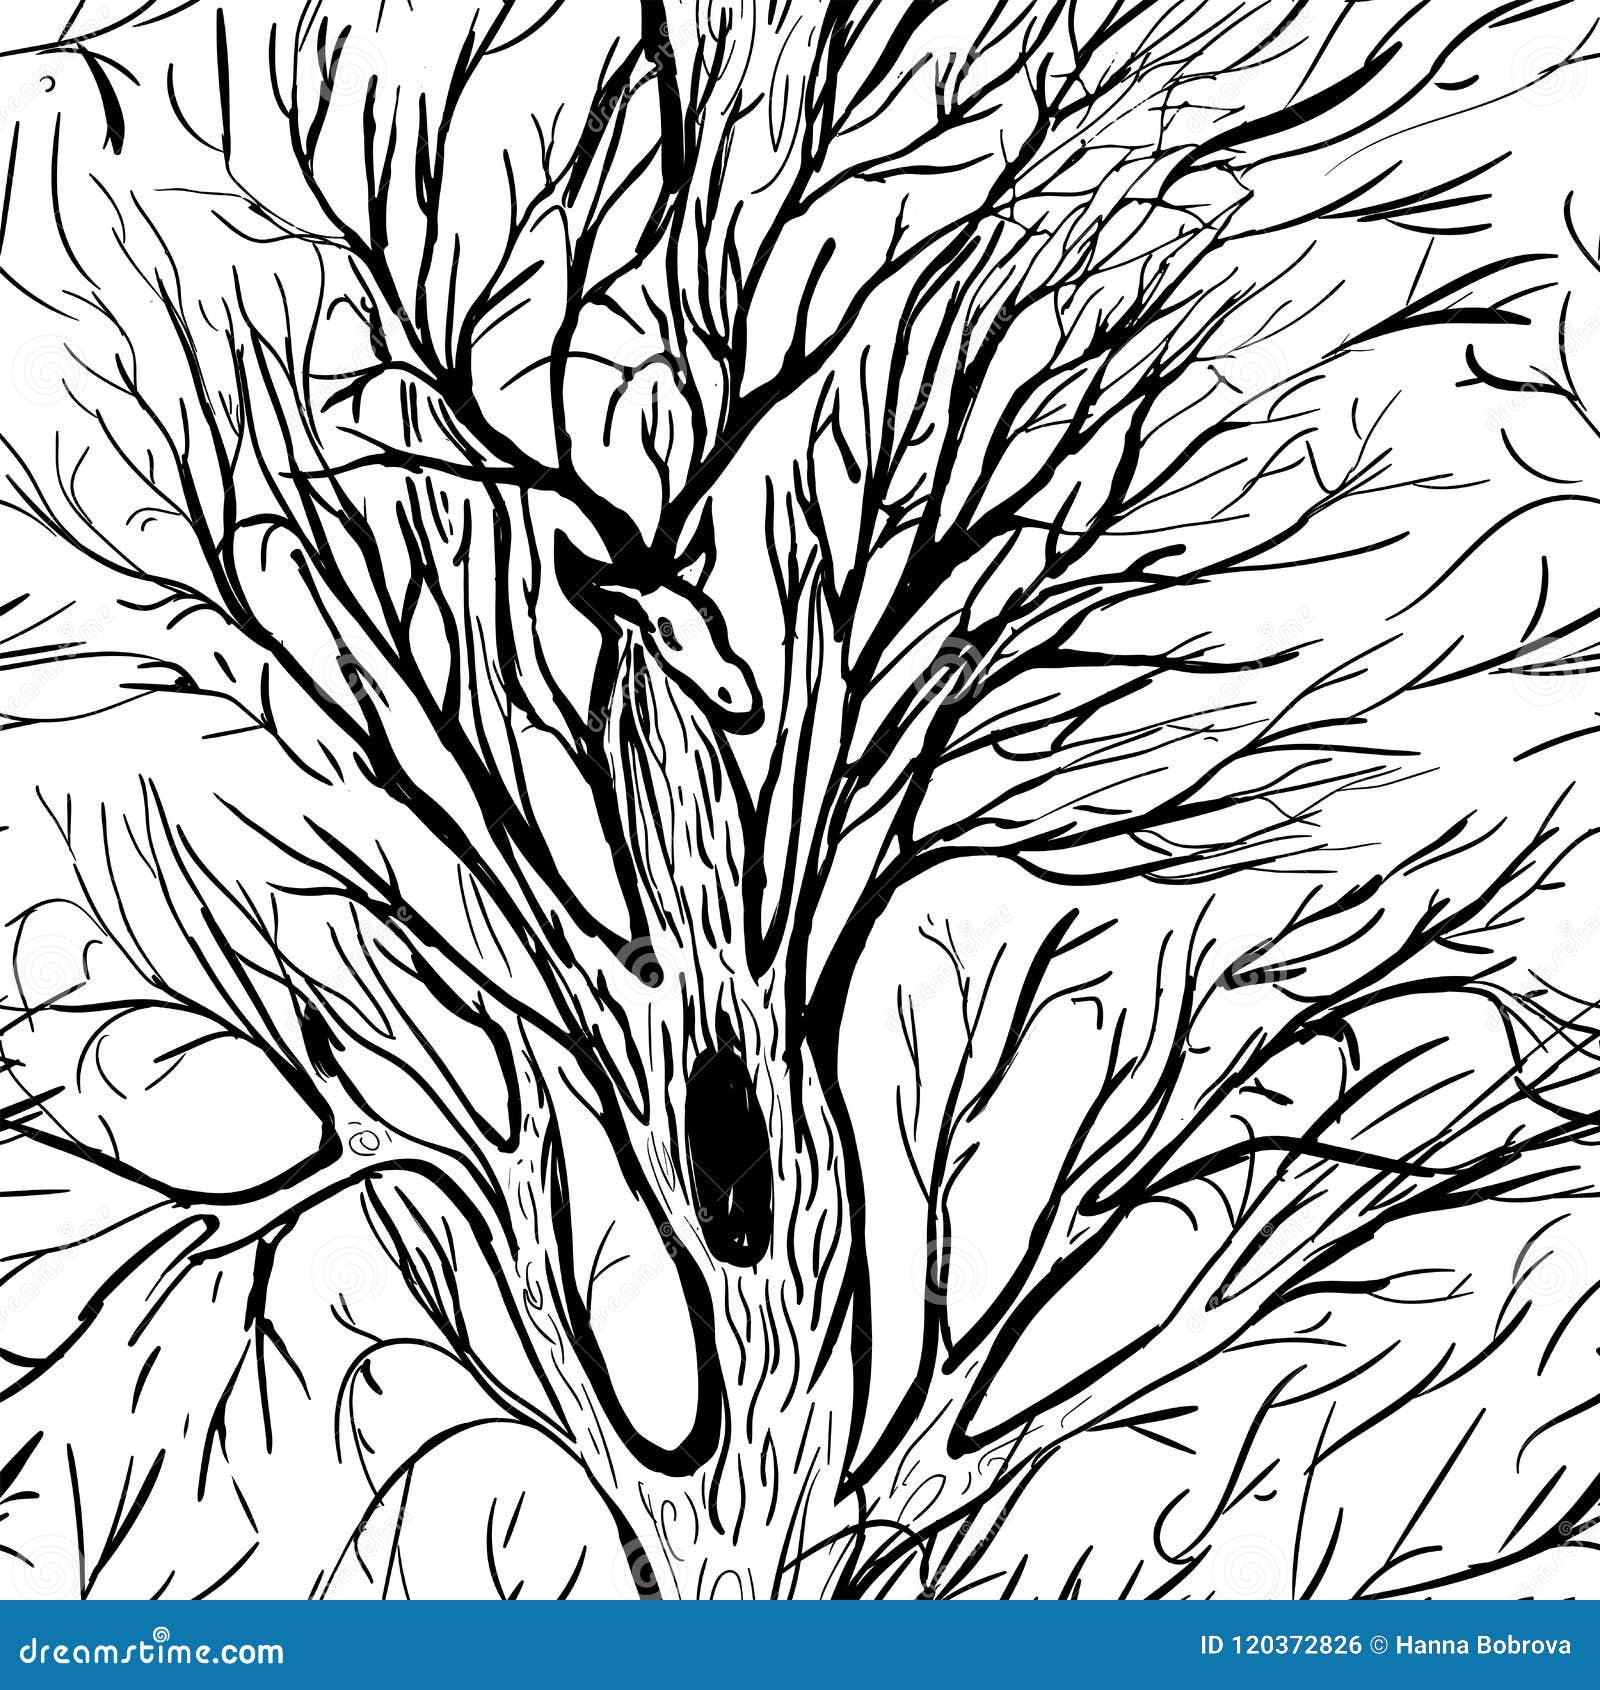 Deer and Tree Silhouette Vector. Illustration Isolated Deer with Big ...